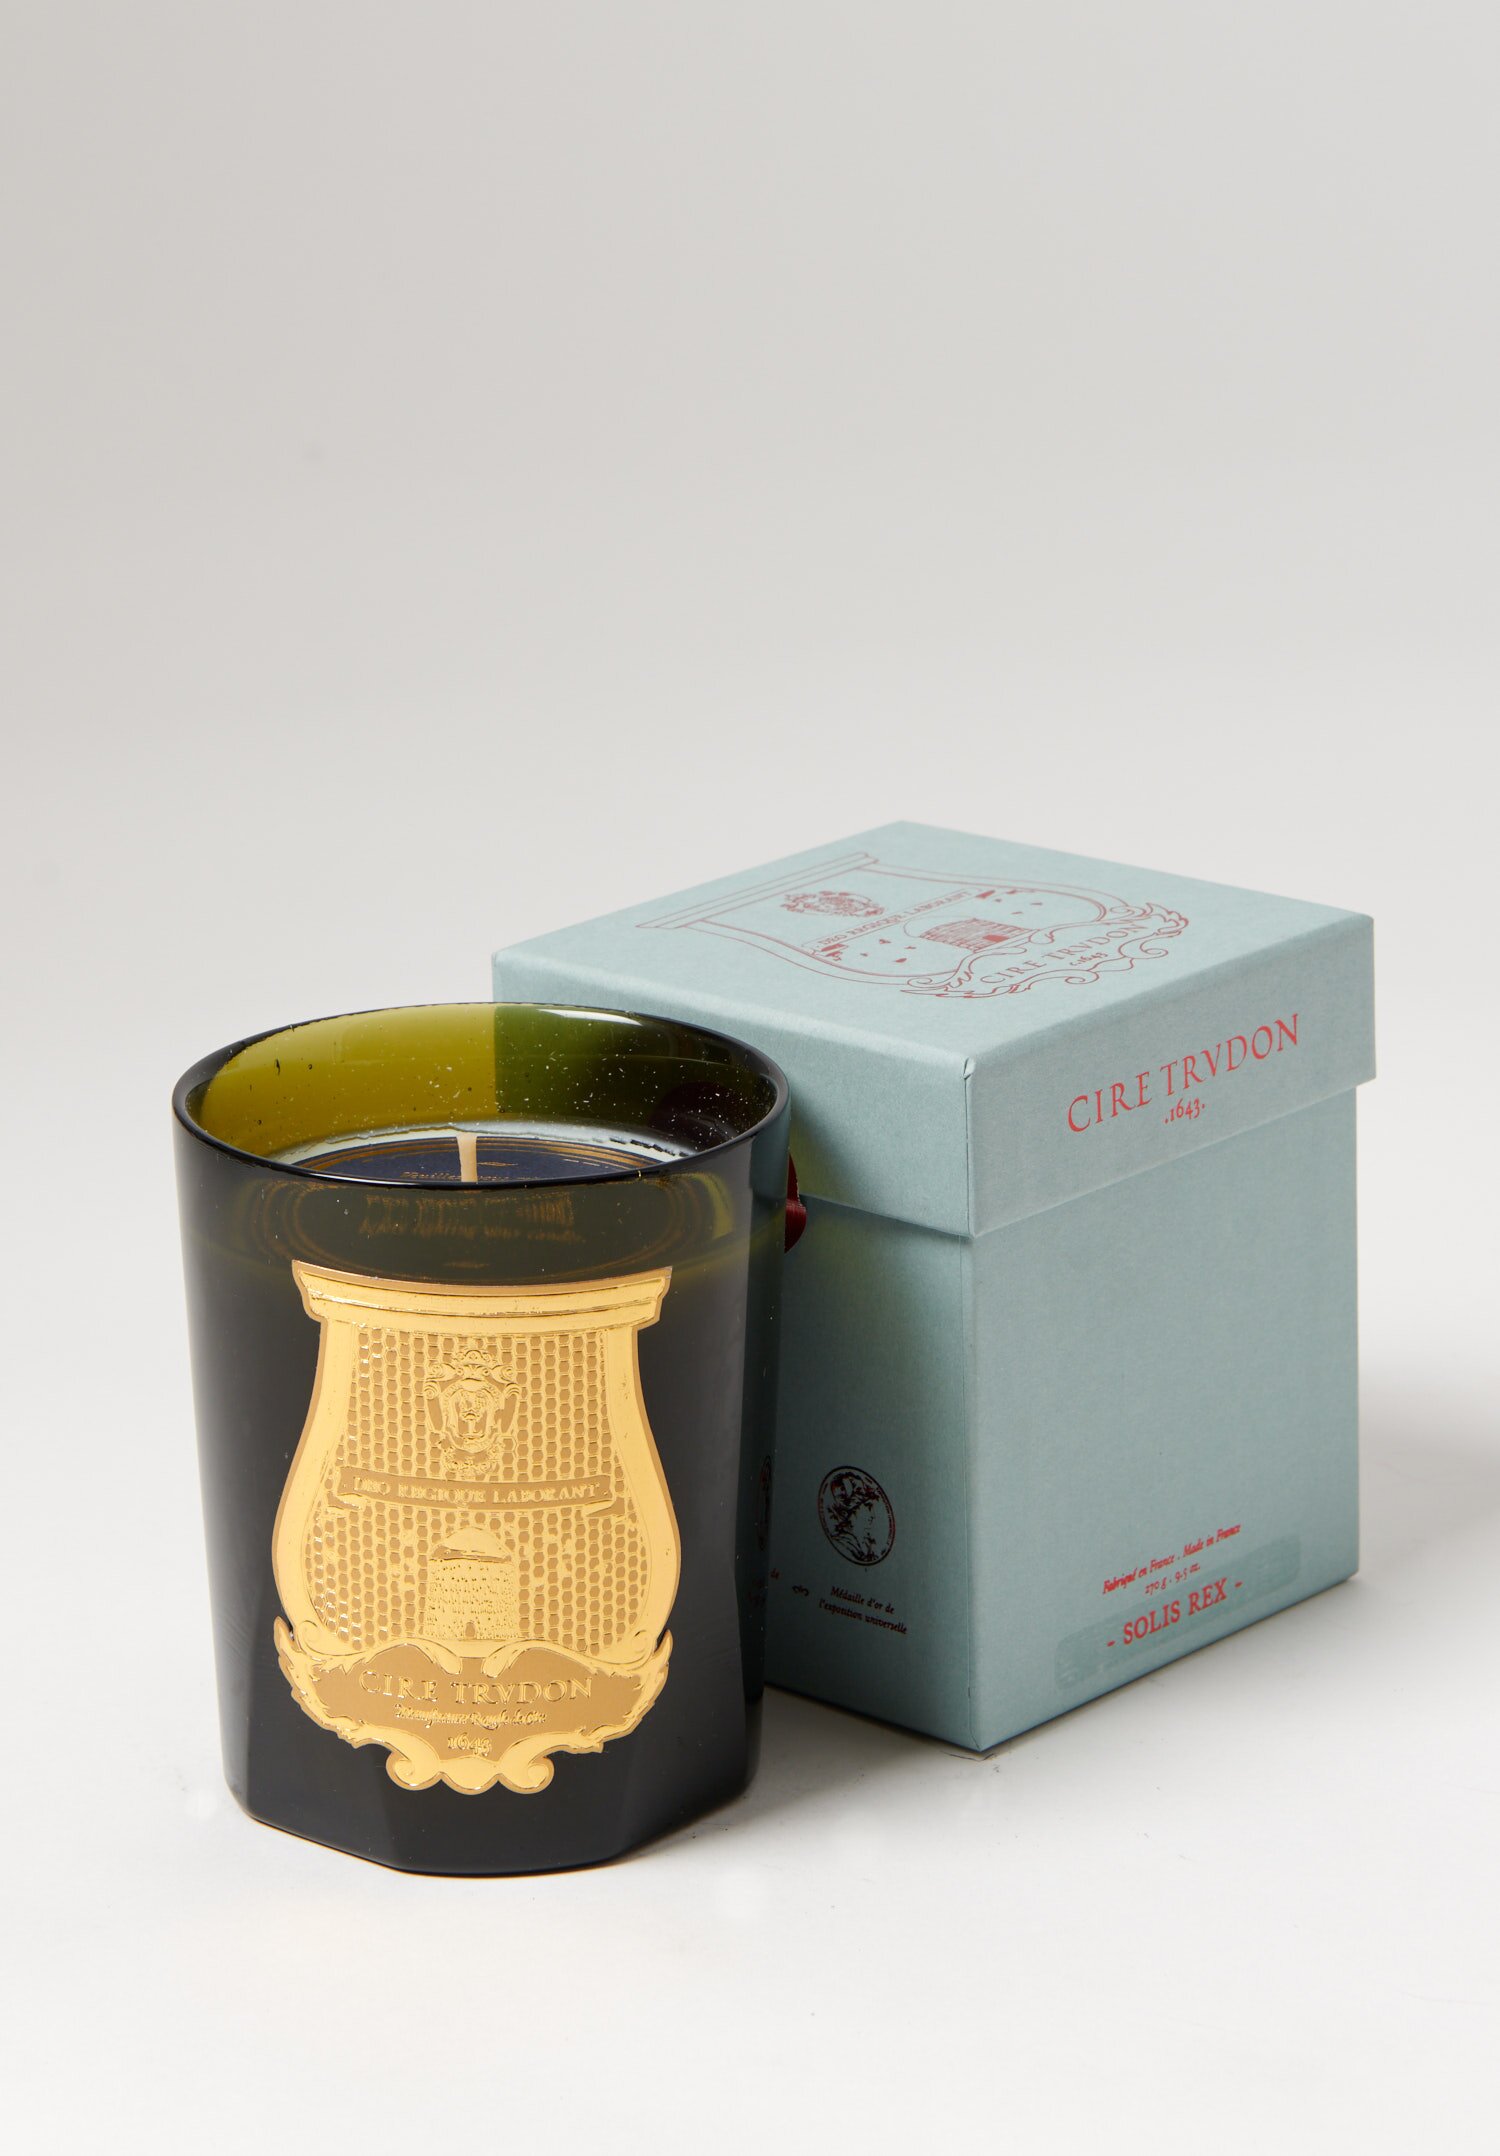 Cire Trudon Classic Candle in Solis Rex | Santa Fe Dry Goods . Workshop ...